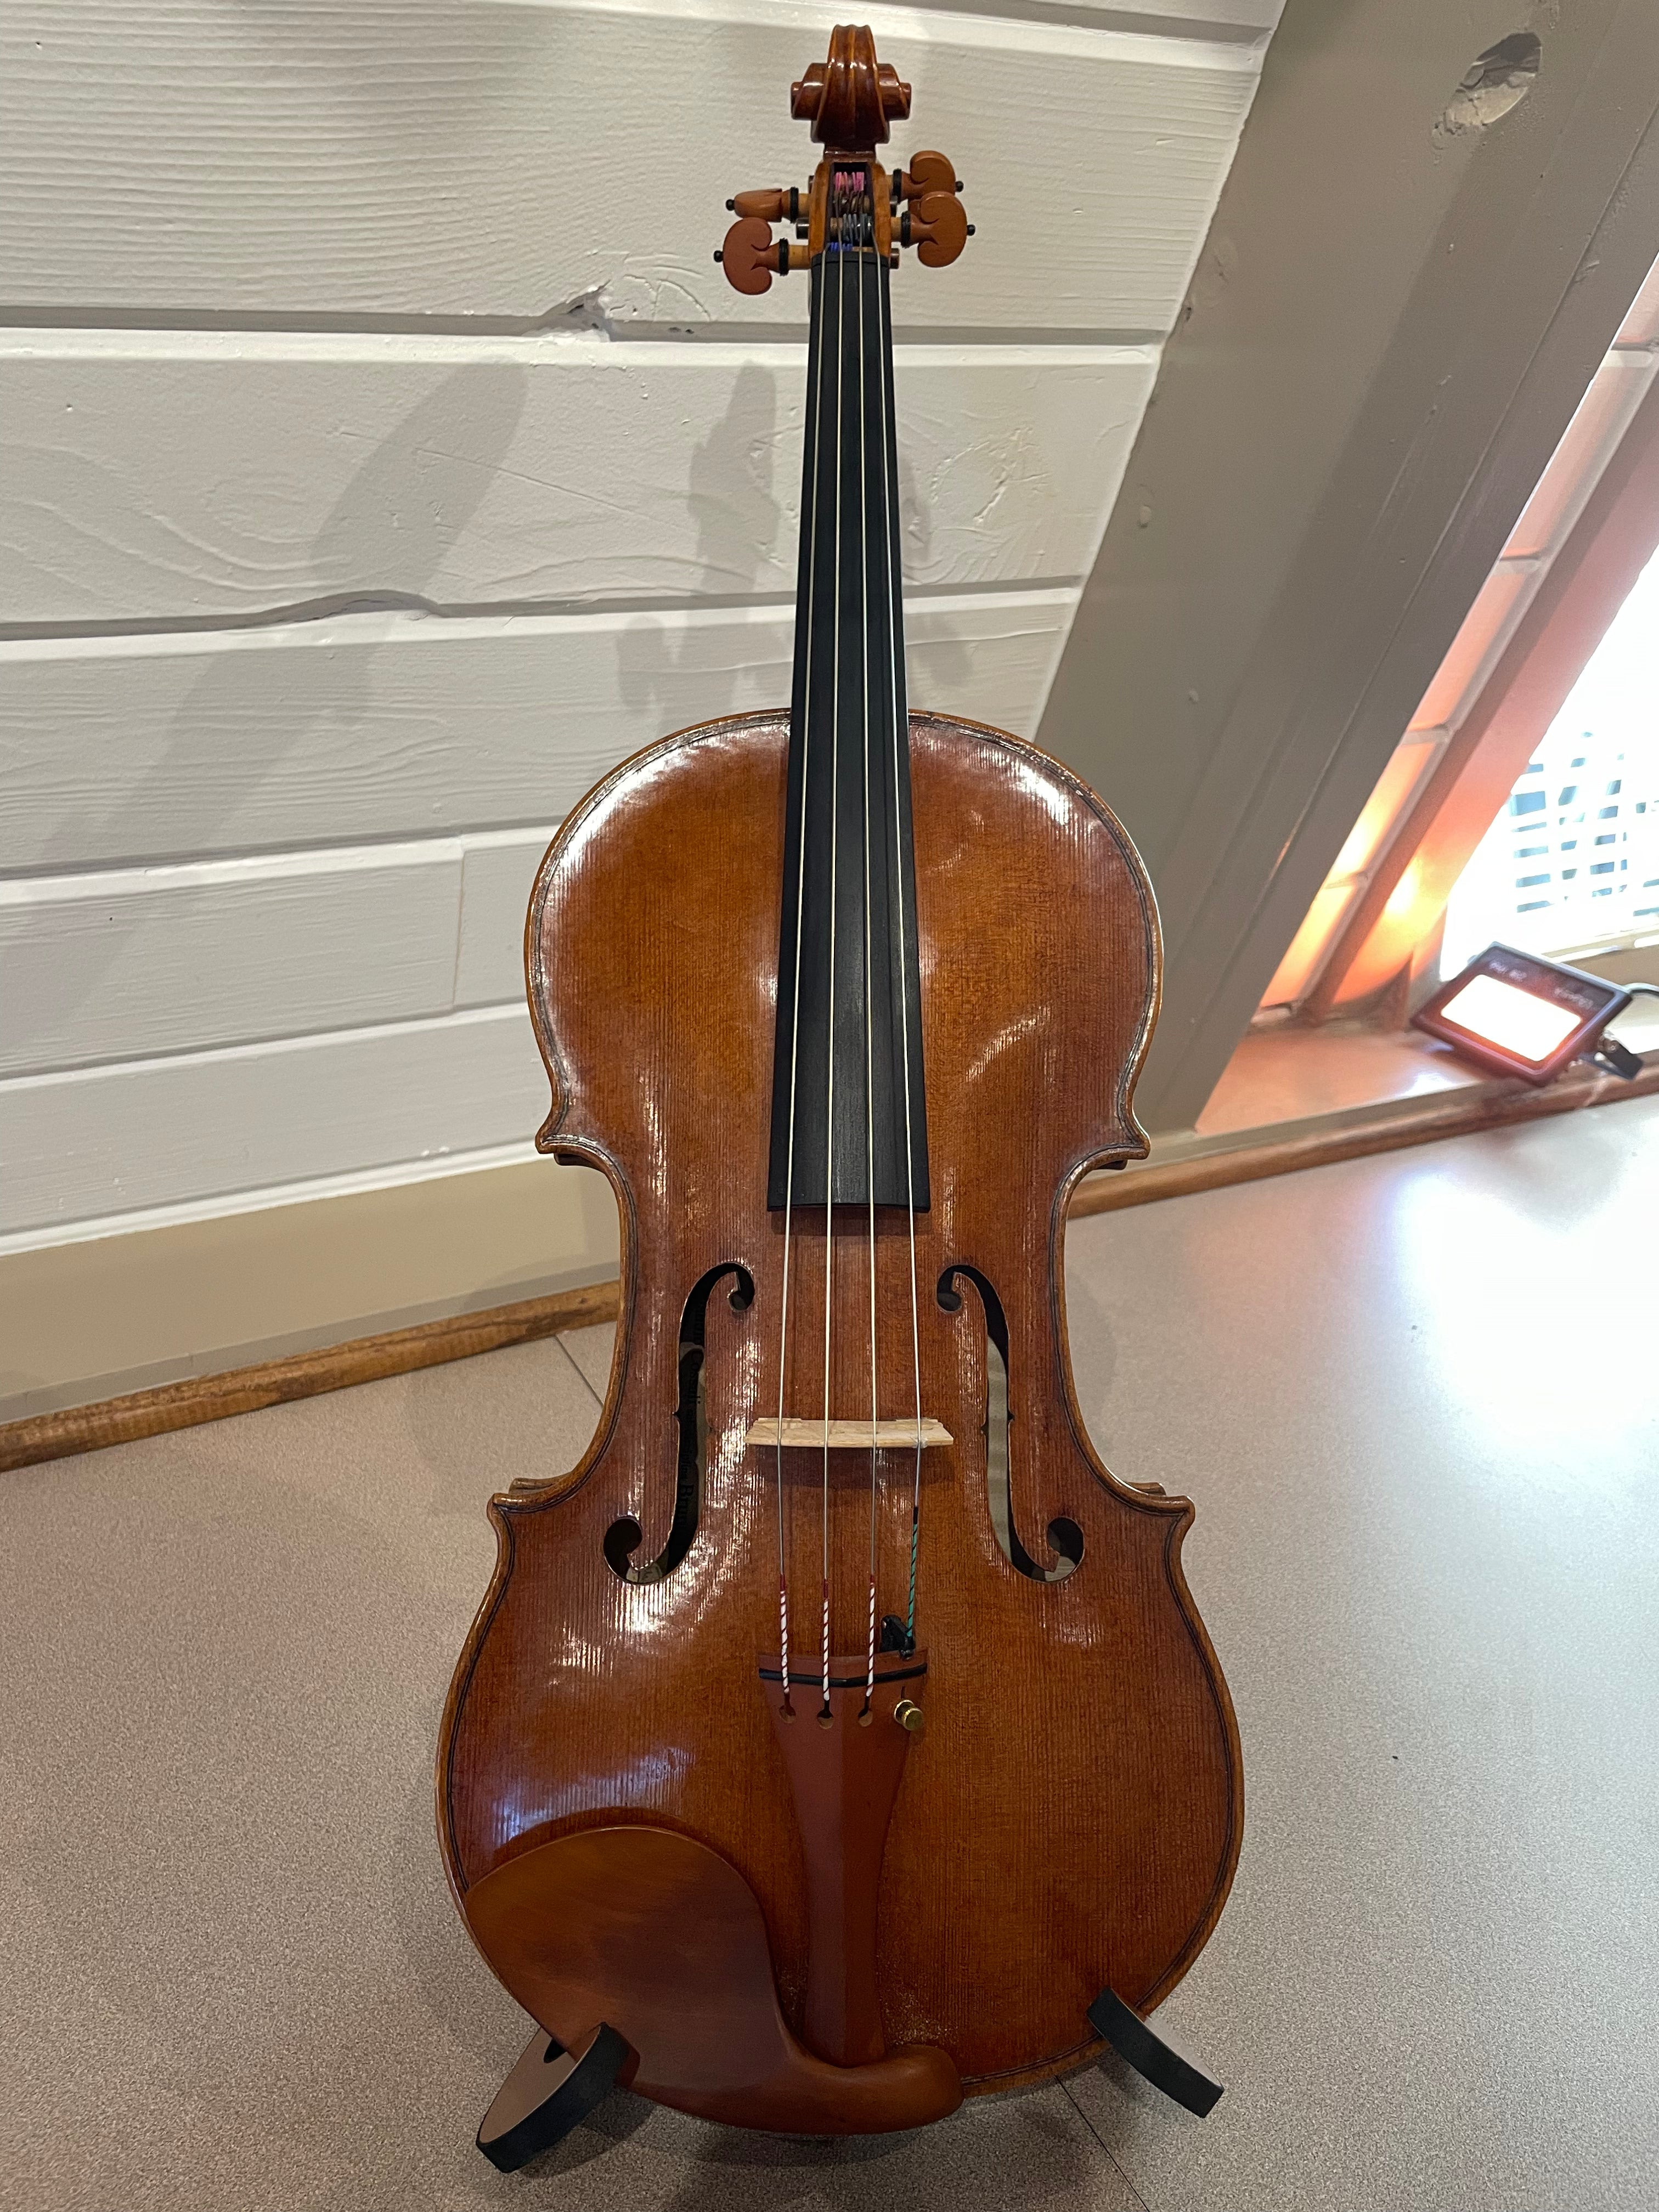 Upgrade 15.5" Viola outfit